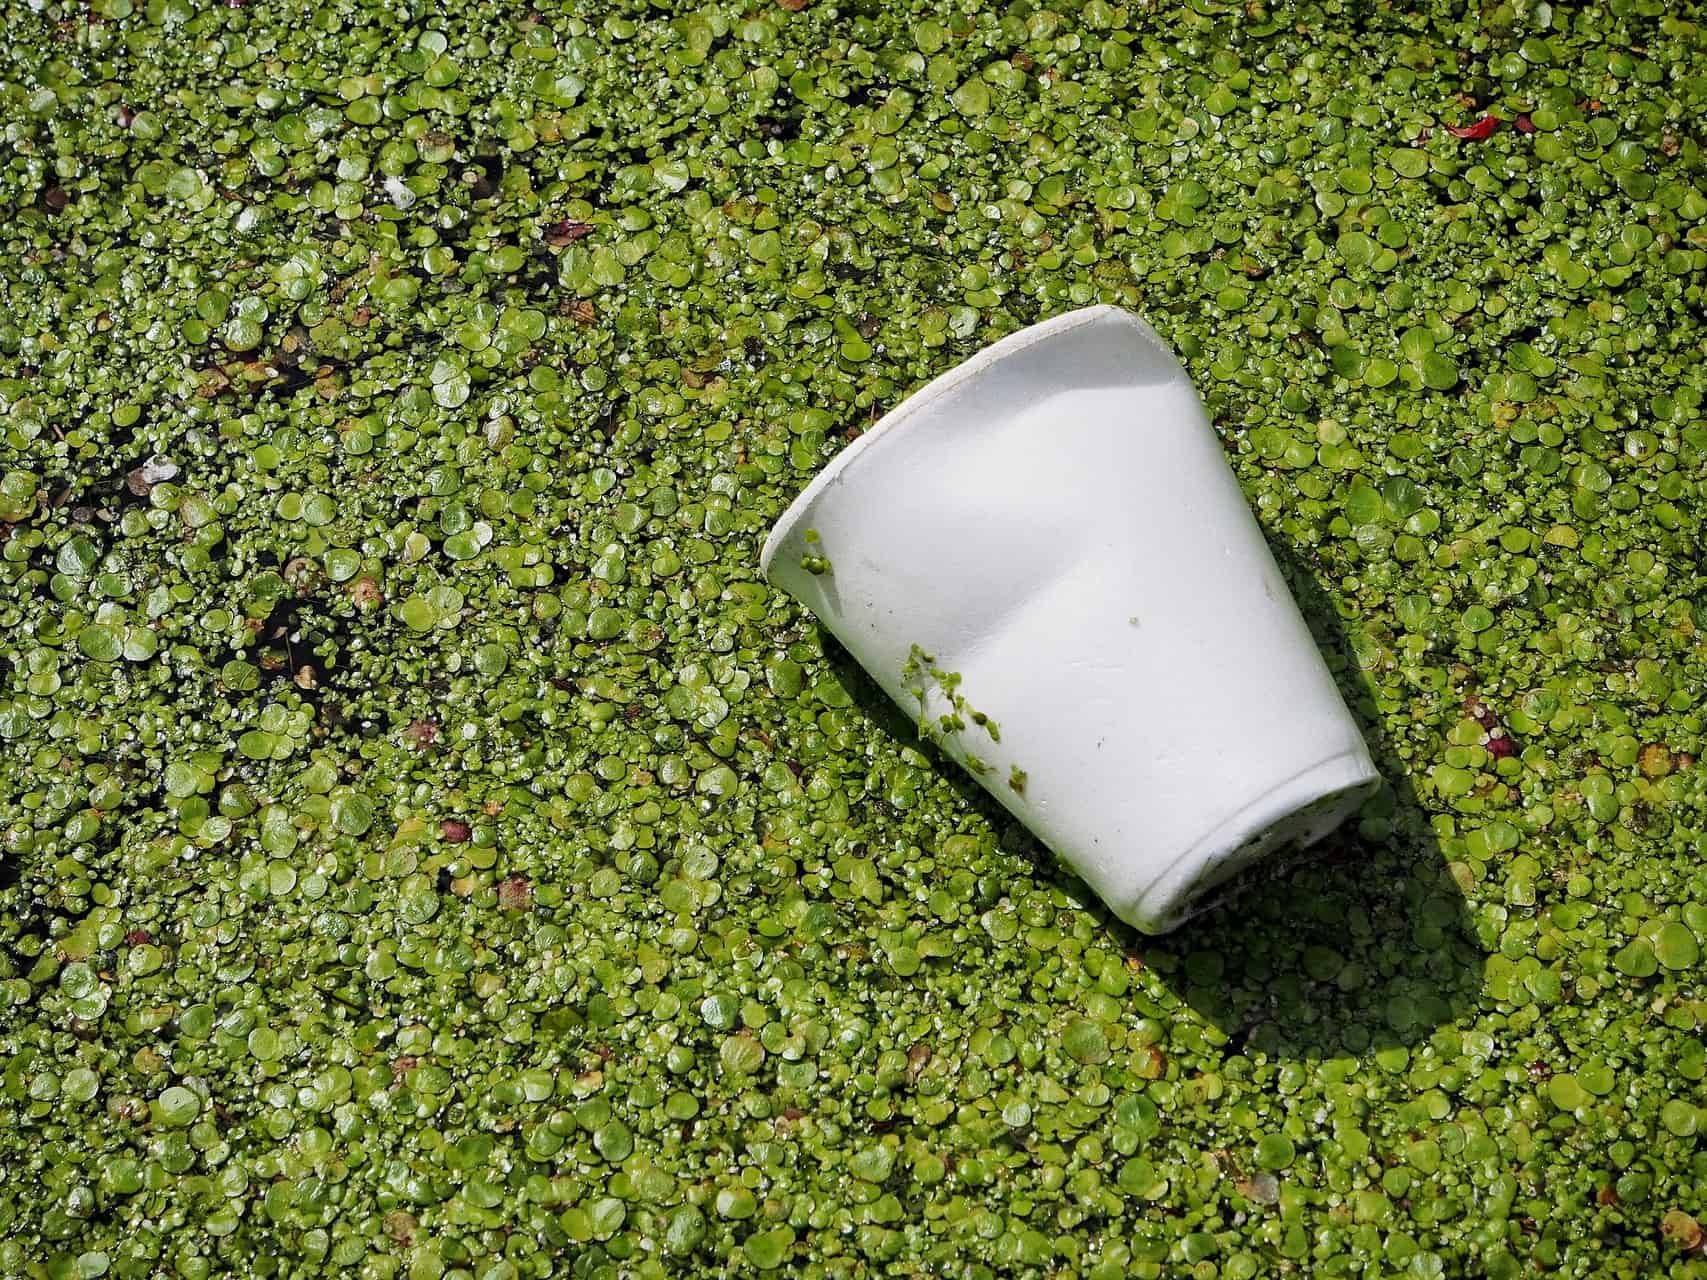 Plastic PLA cup left outside in grassy water